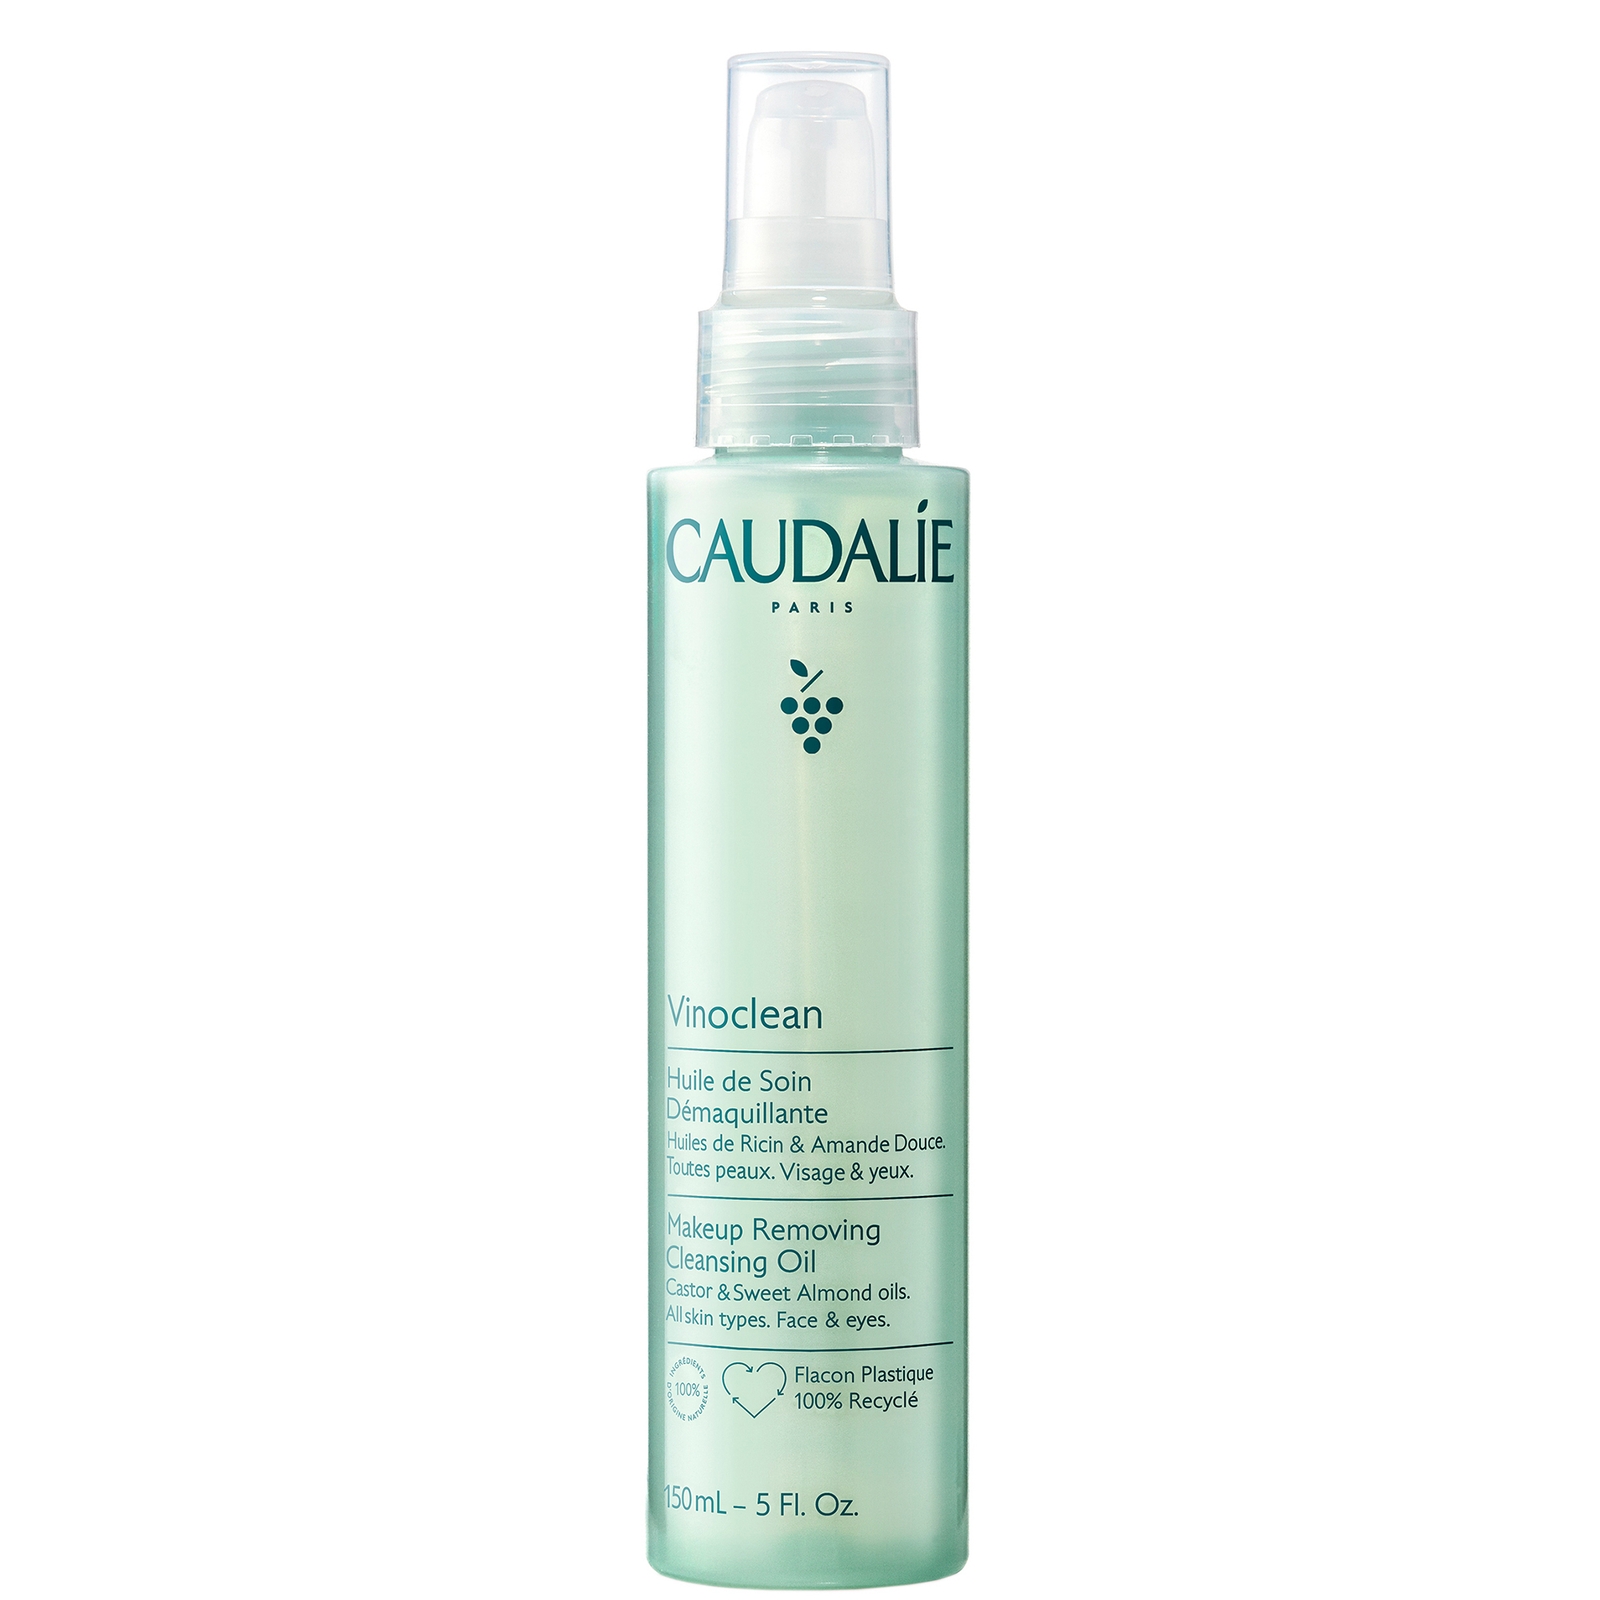 Photos - Facial / Body Cleansing Product Caudalie Vinoclean Makeup Removing Cleansing Oil 150ml 